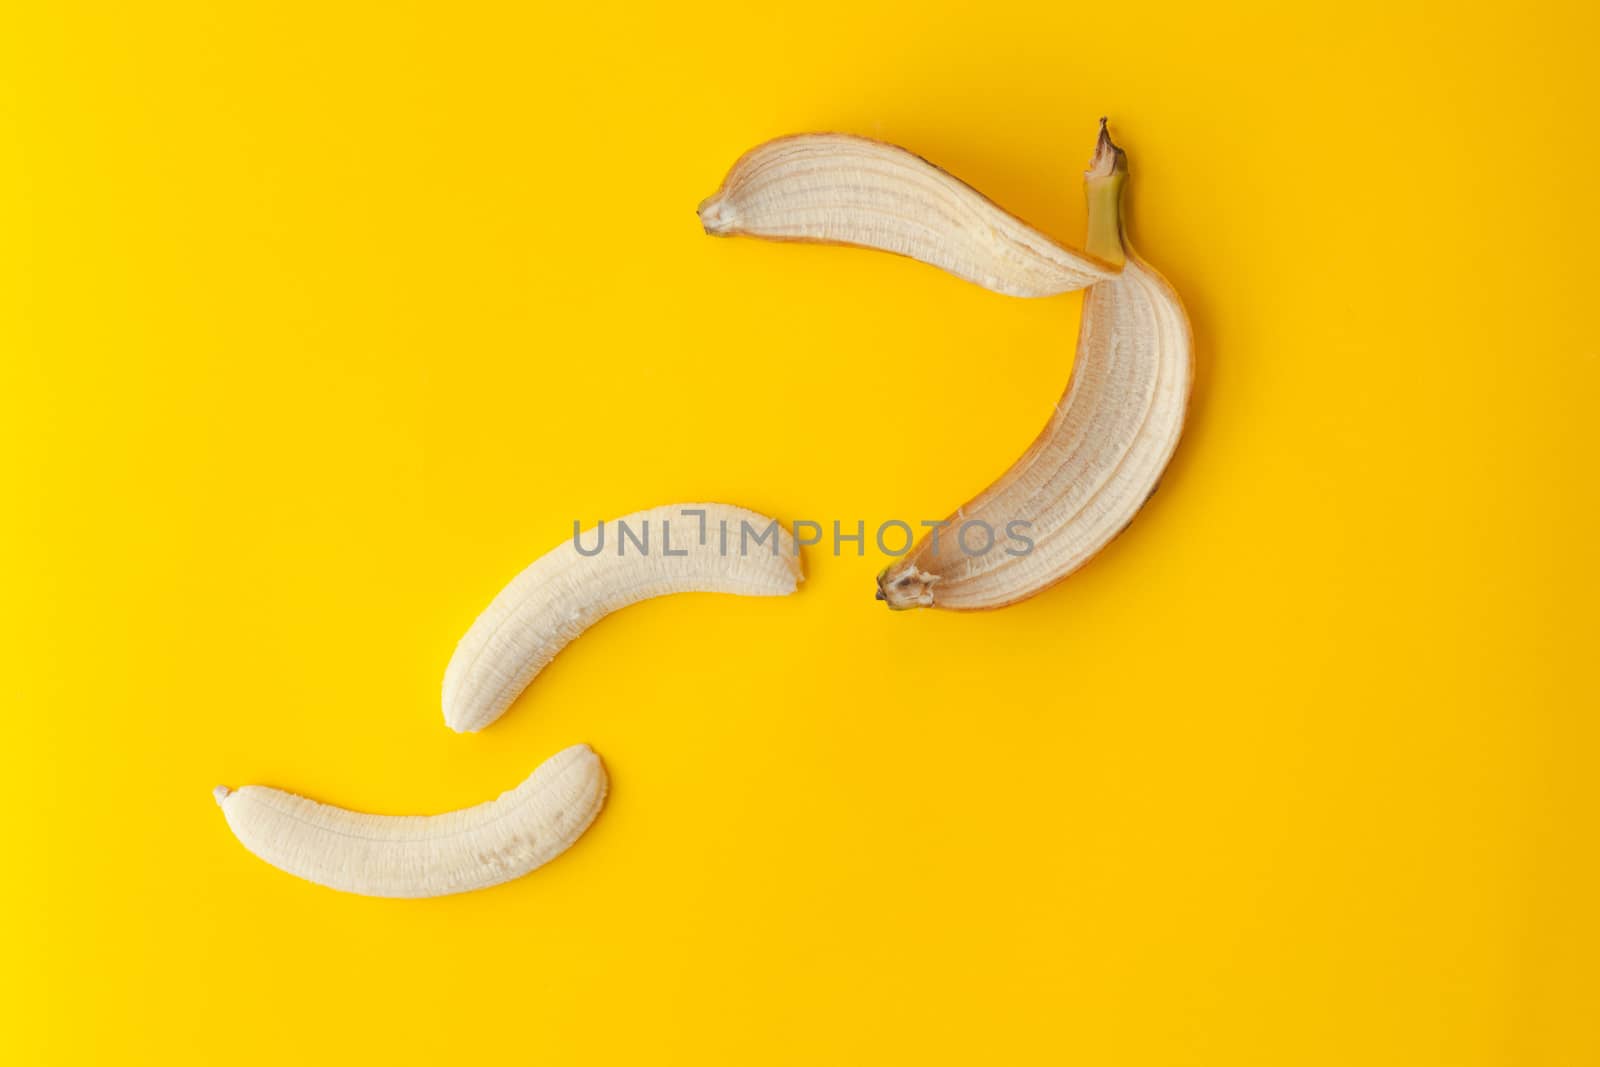 Peel banana and fruit on a yellow background by andongob